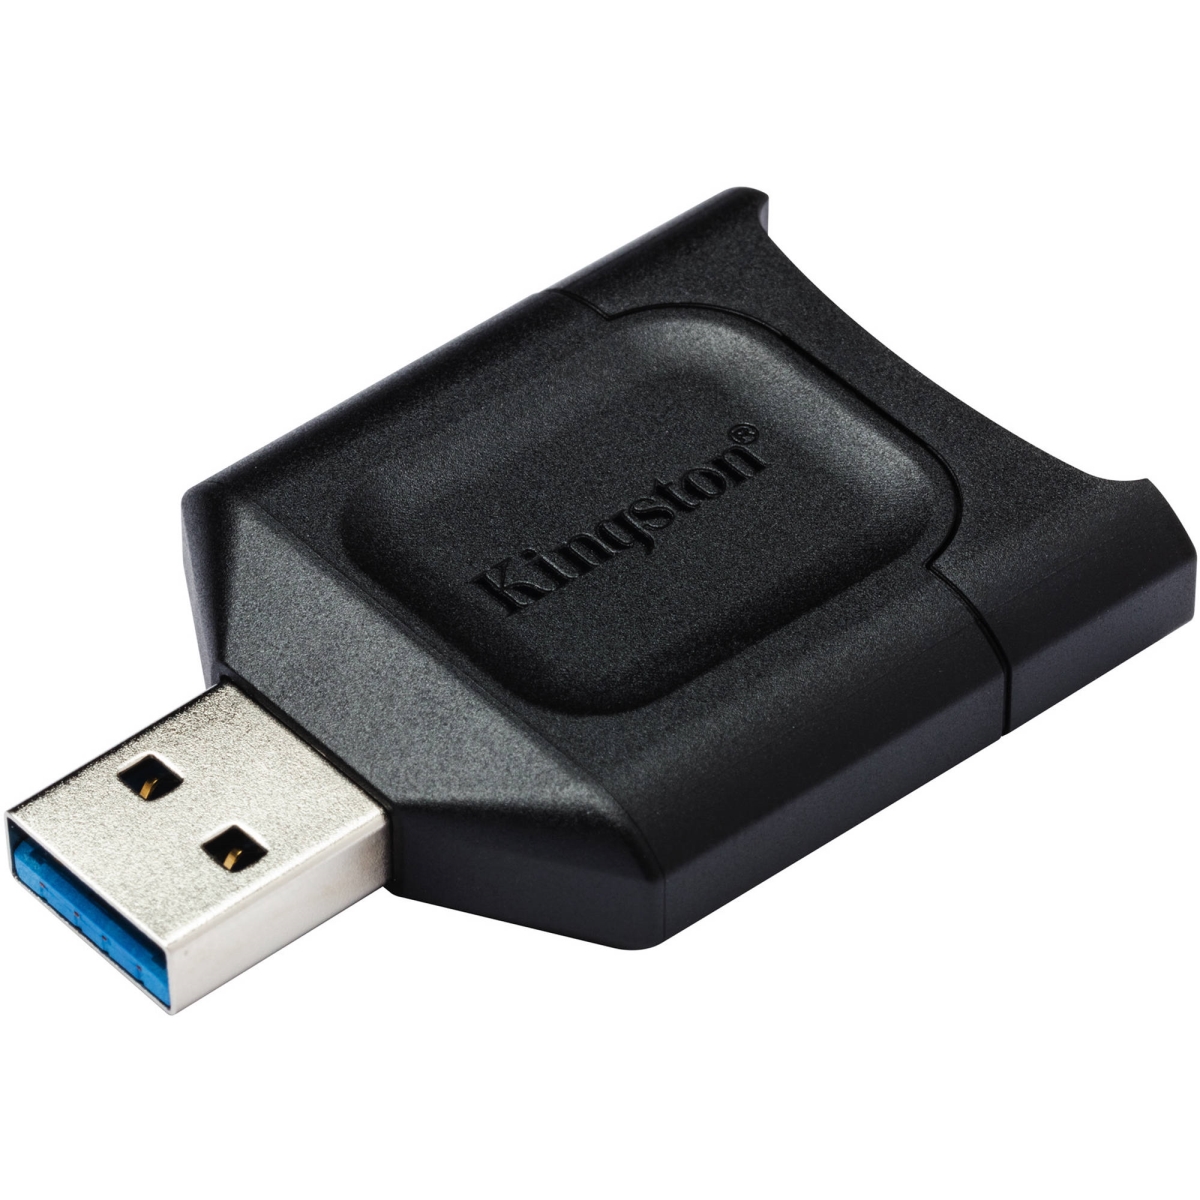 Picture of Kingston MLP Mobilelite Plus SD Card Reader - USB 3.1 SDHC-SDXC UHS-II